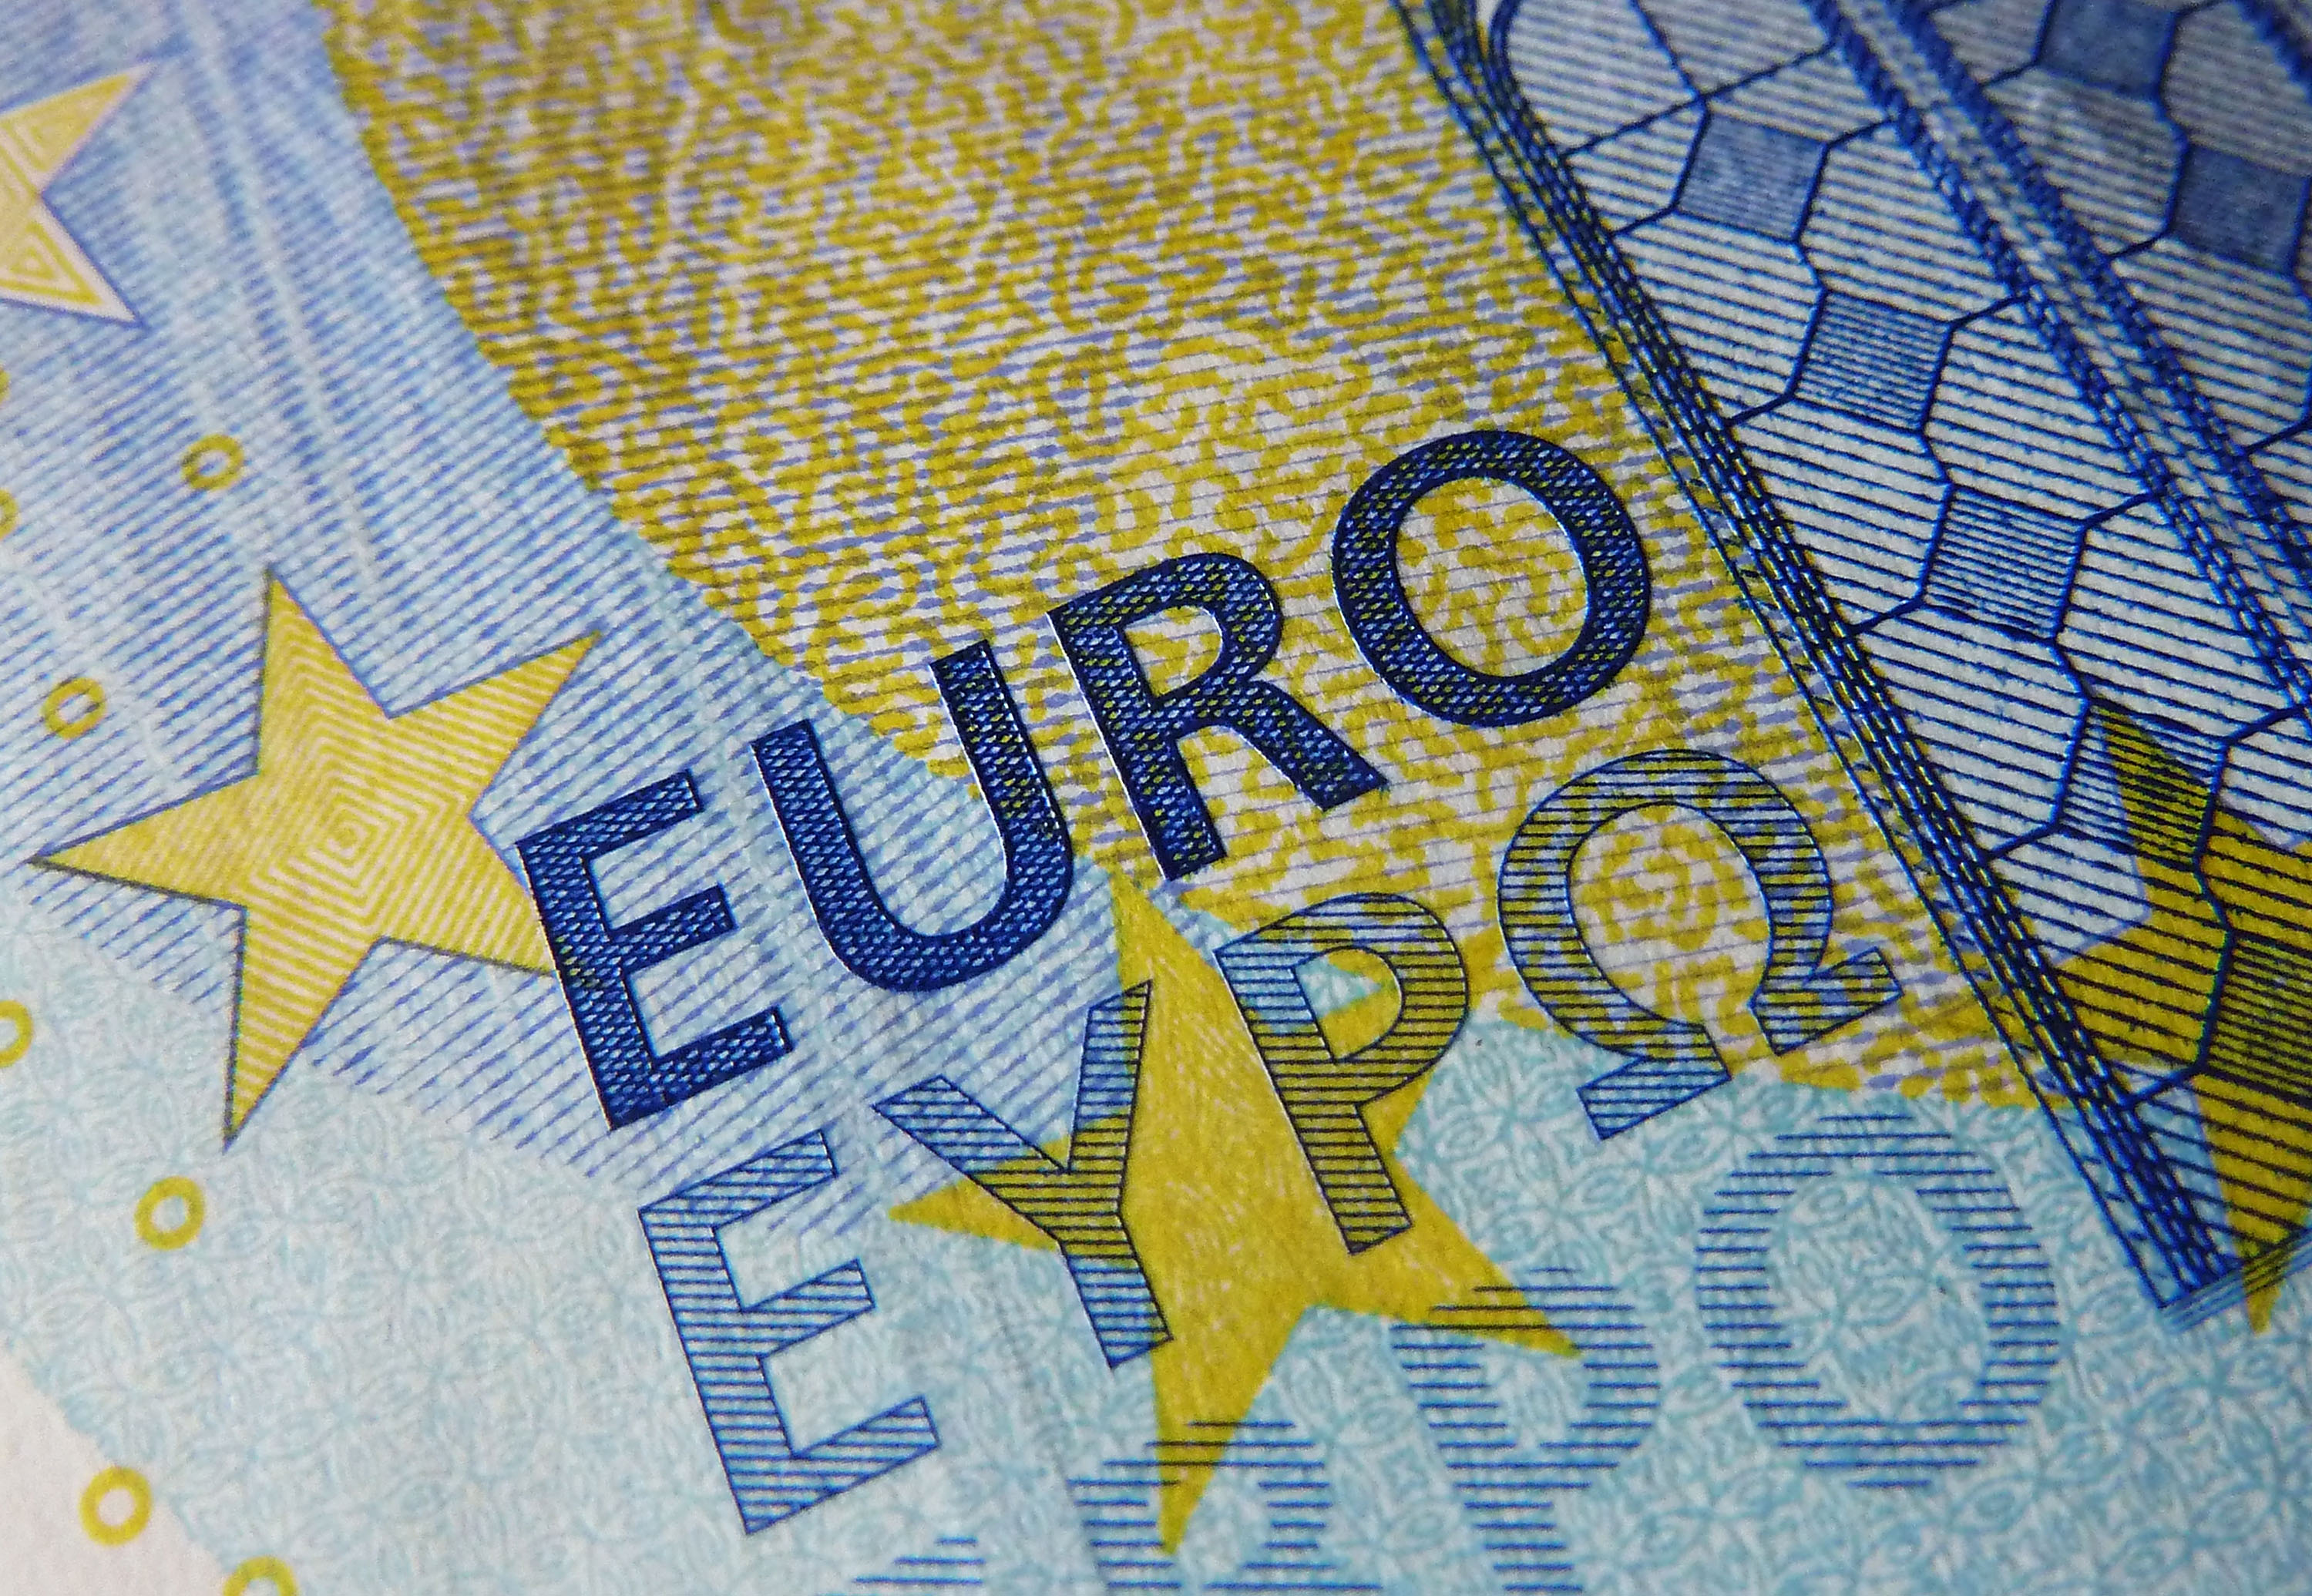 LONDON, ENGLAND - MARCH 04: A detail of the twenty Euro bank note, on March 4, 2016 in London, England. (Photo by Jim Dyson/Getty Images)